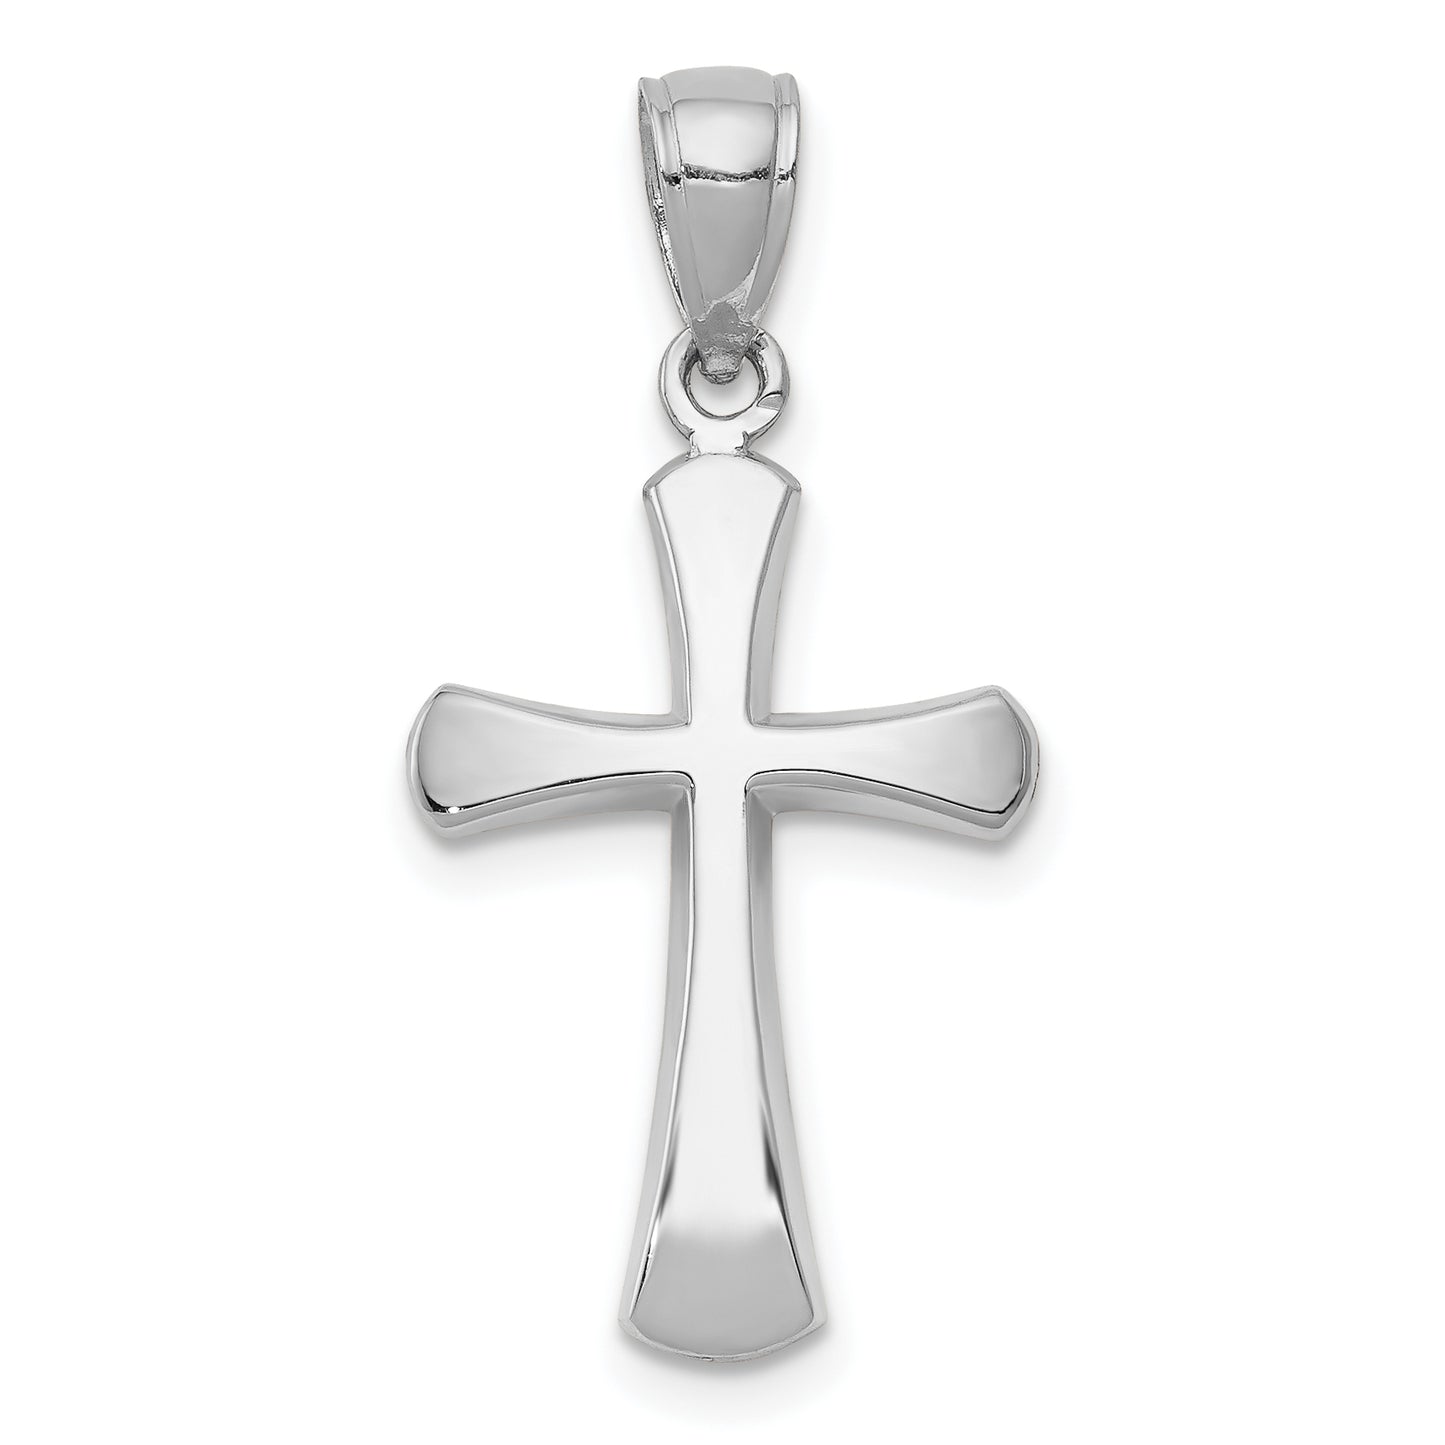 14K White Gold Polished Beveled Cross with Round Tips Charm